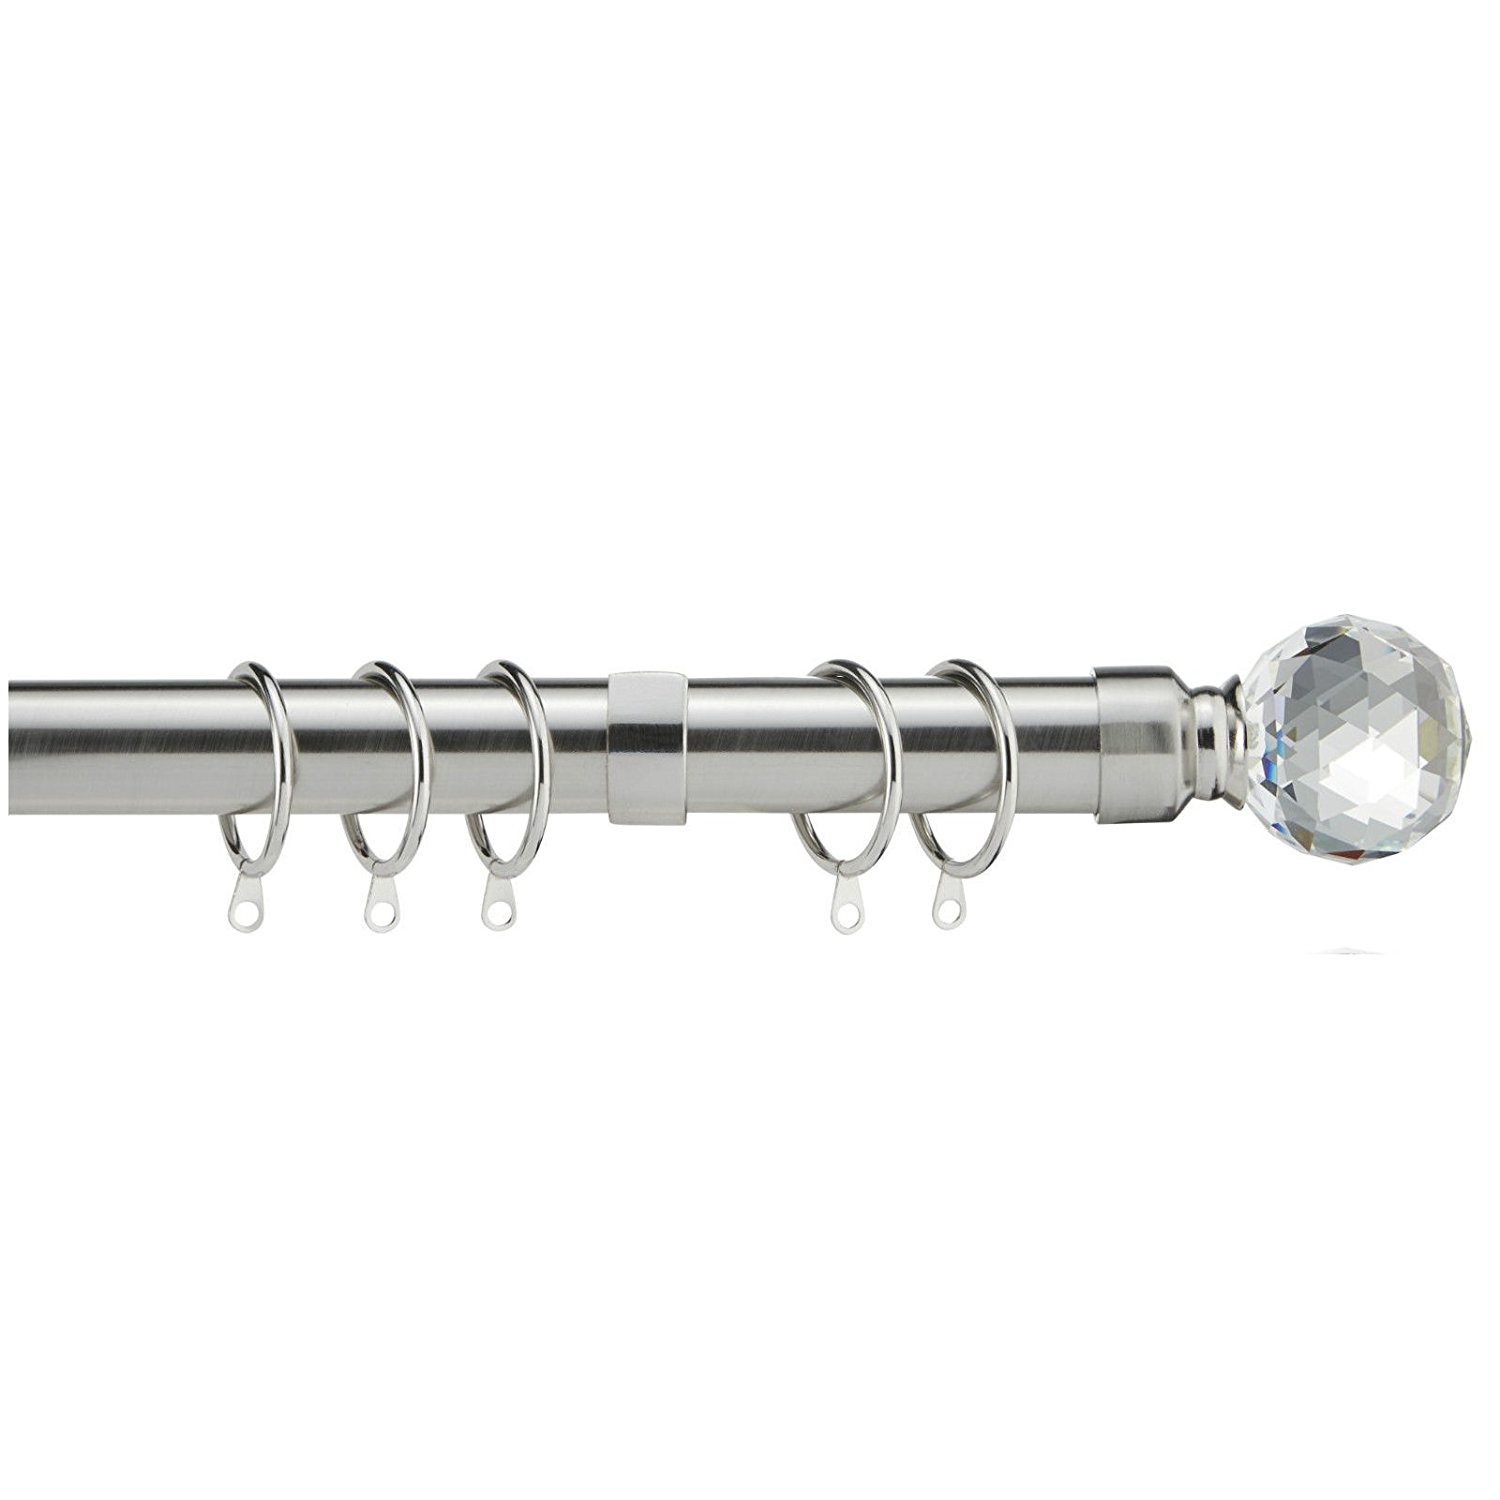 3 Colours Home Treats Extendable Curtain Pole 28mm 70-120cm, Black Nickel Includes.Rings,Crystal Finals & Fittings 